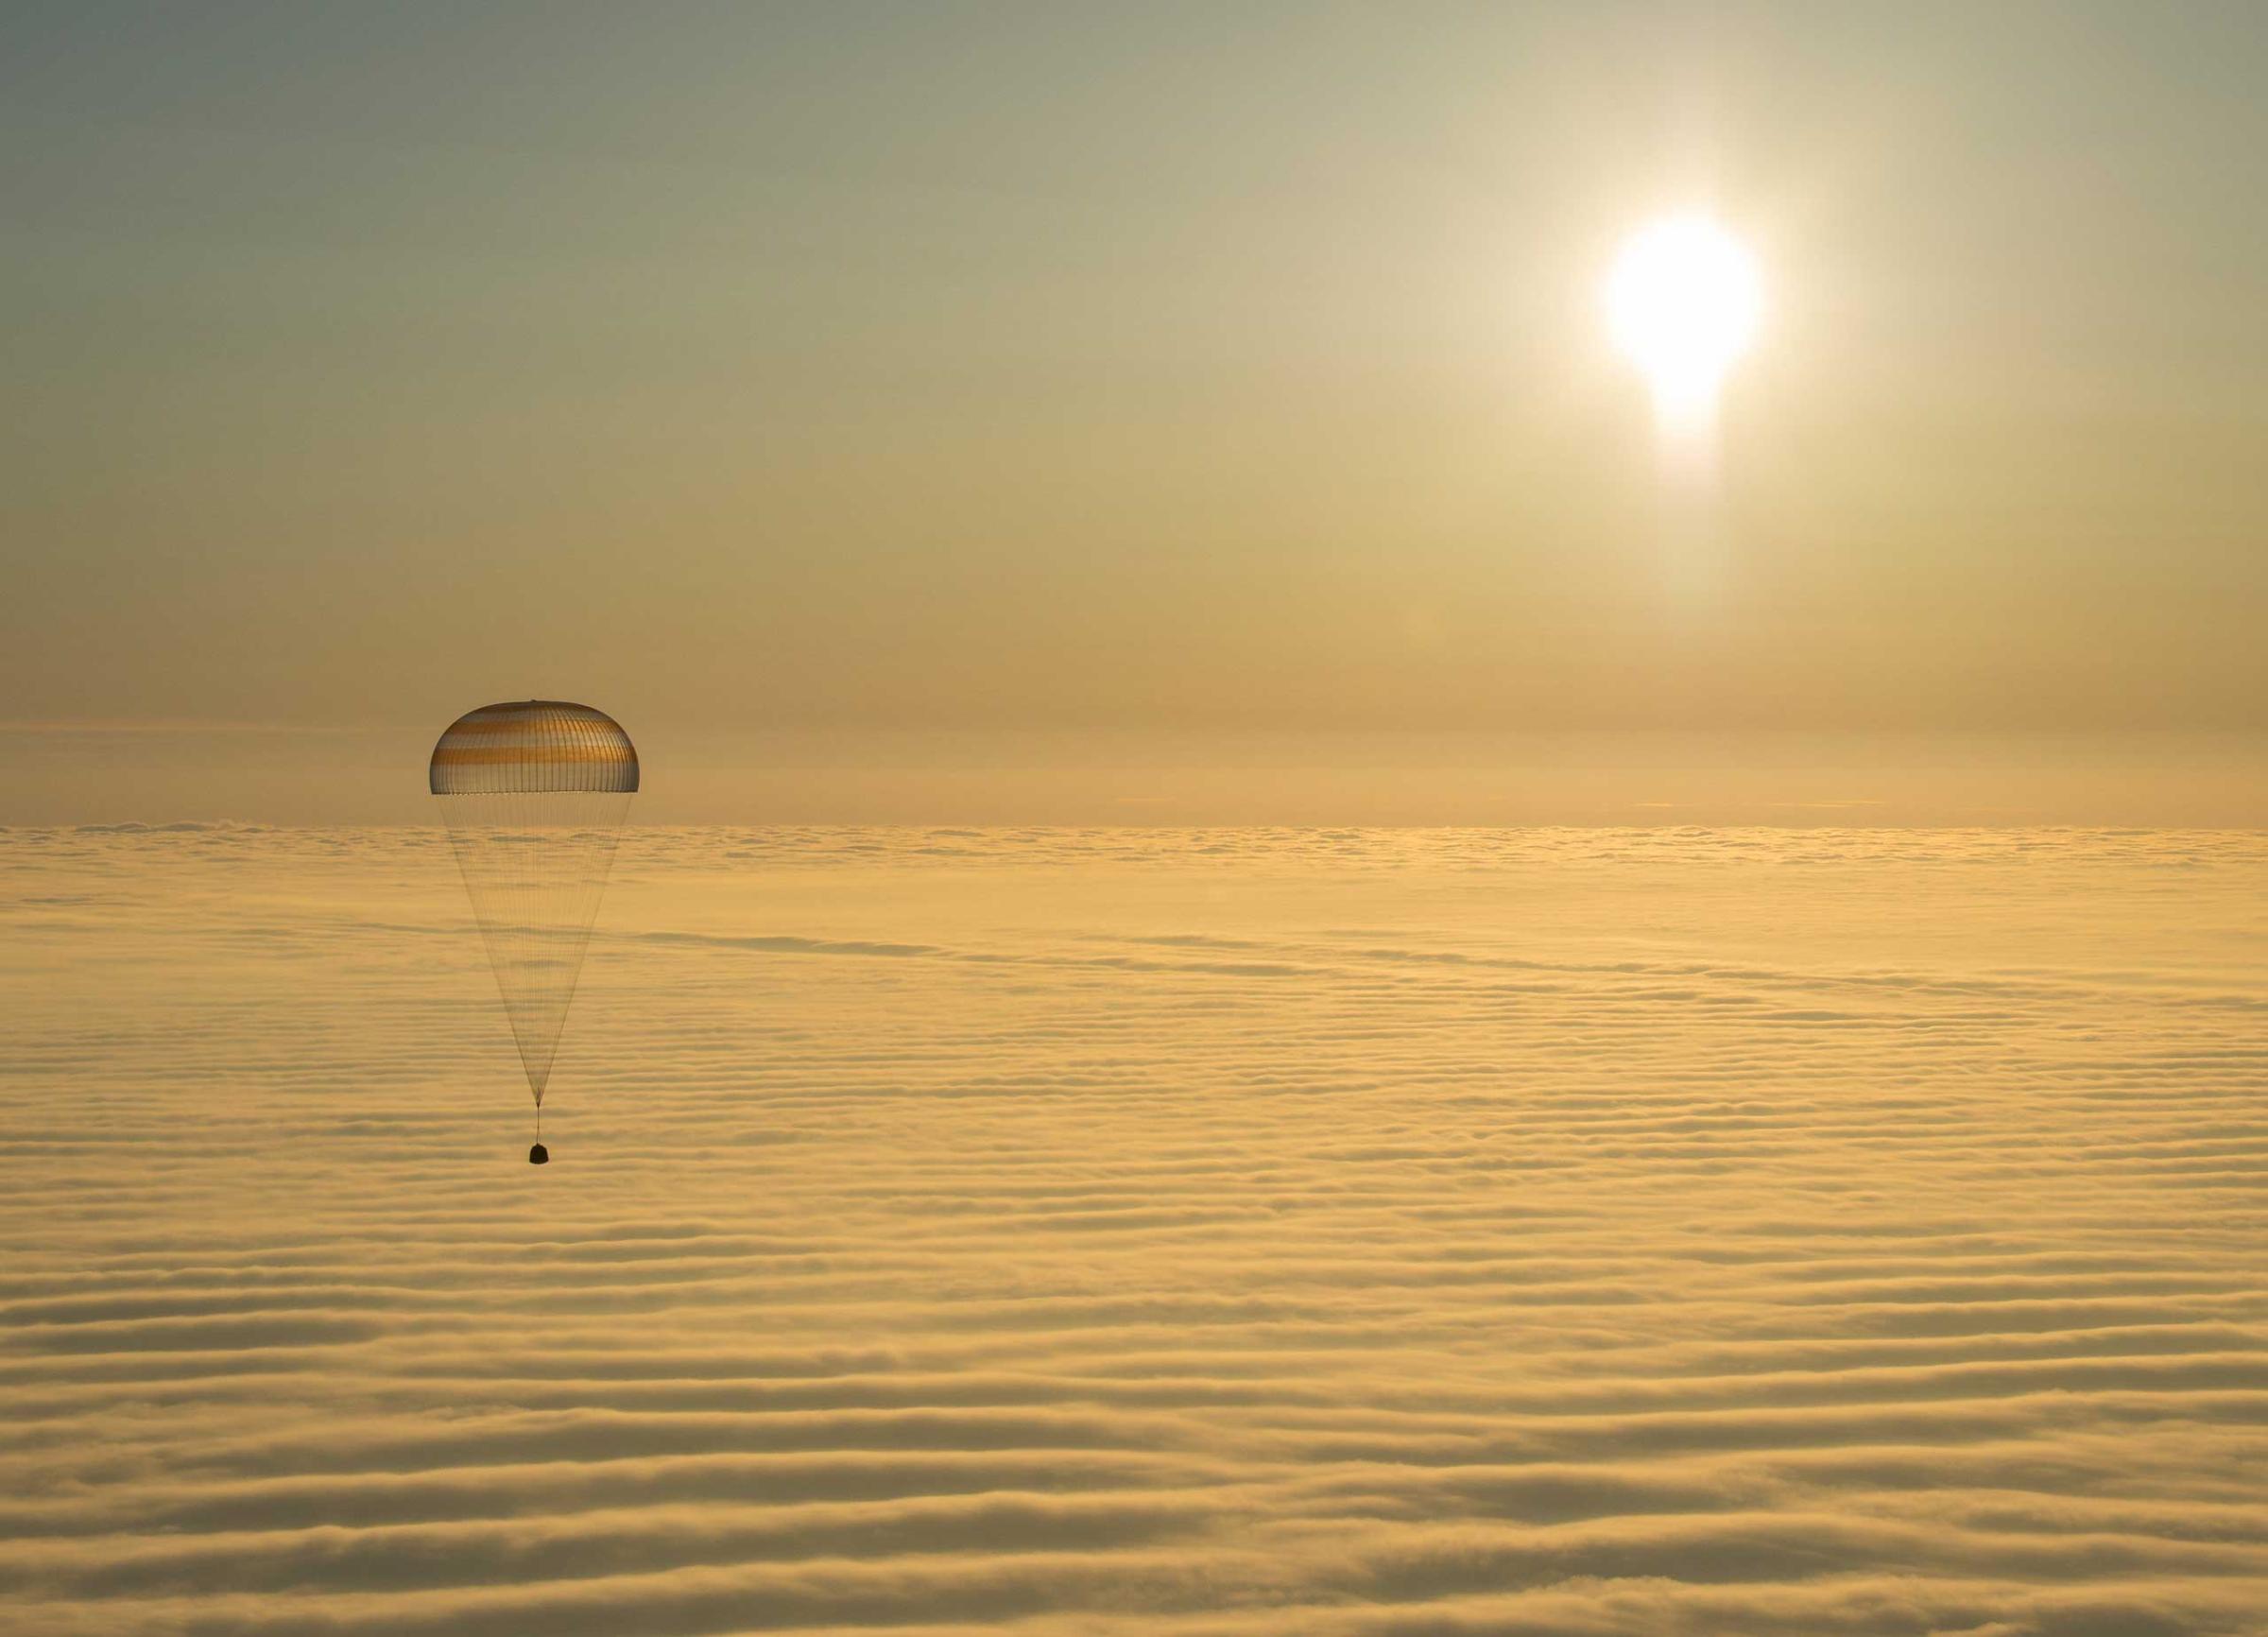 The Soyuz TMA-14M spacecraft is seen as it lands with Expedition 42 commander Barry Wilmore of NASA, Alexander Samokutyaev of the Russian Federal Space Agency (Roscosmos) and Elena Serova of Roscosmos near the town of Zhezkazgan, Kazakhstan. NASA Astronaut Wilmore, Russian Cosmonauts Samokutyaev and Serova are returning after almost six months onboard the International Space Station where they served as members of the Expedition 41 and 42 crews. March 12, 2015